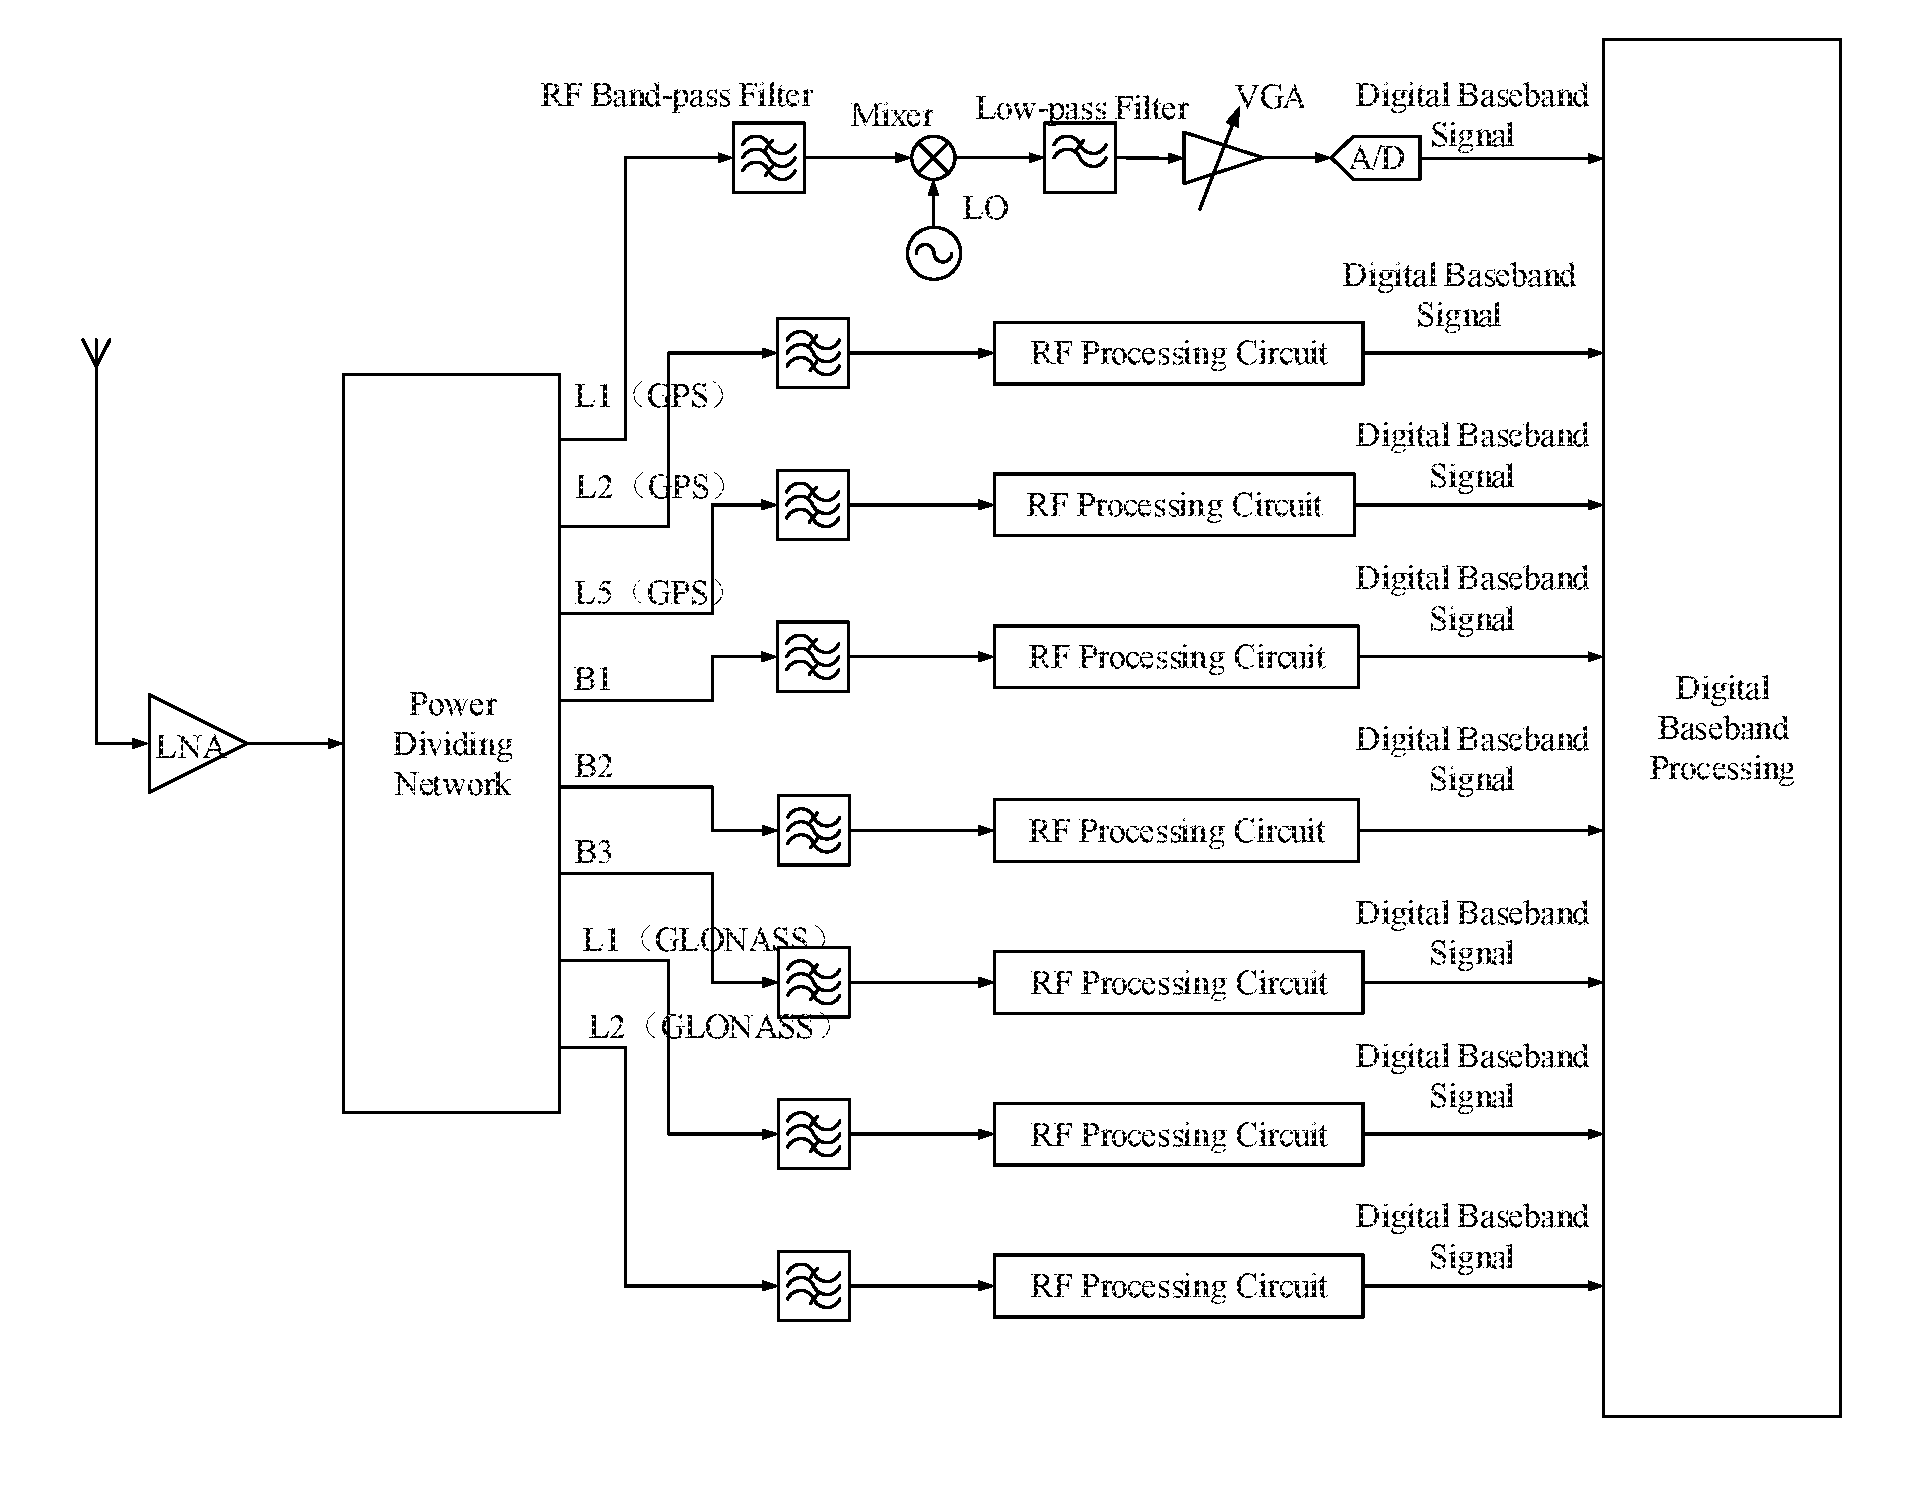 Radio frequency circuit structure for implementing function of converting GNSS satellite signal into baseband signal